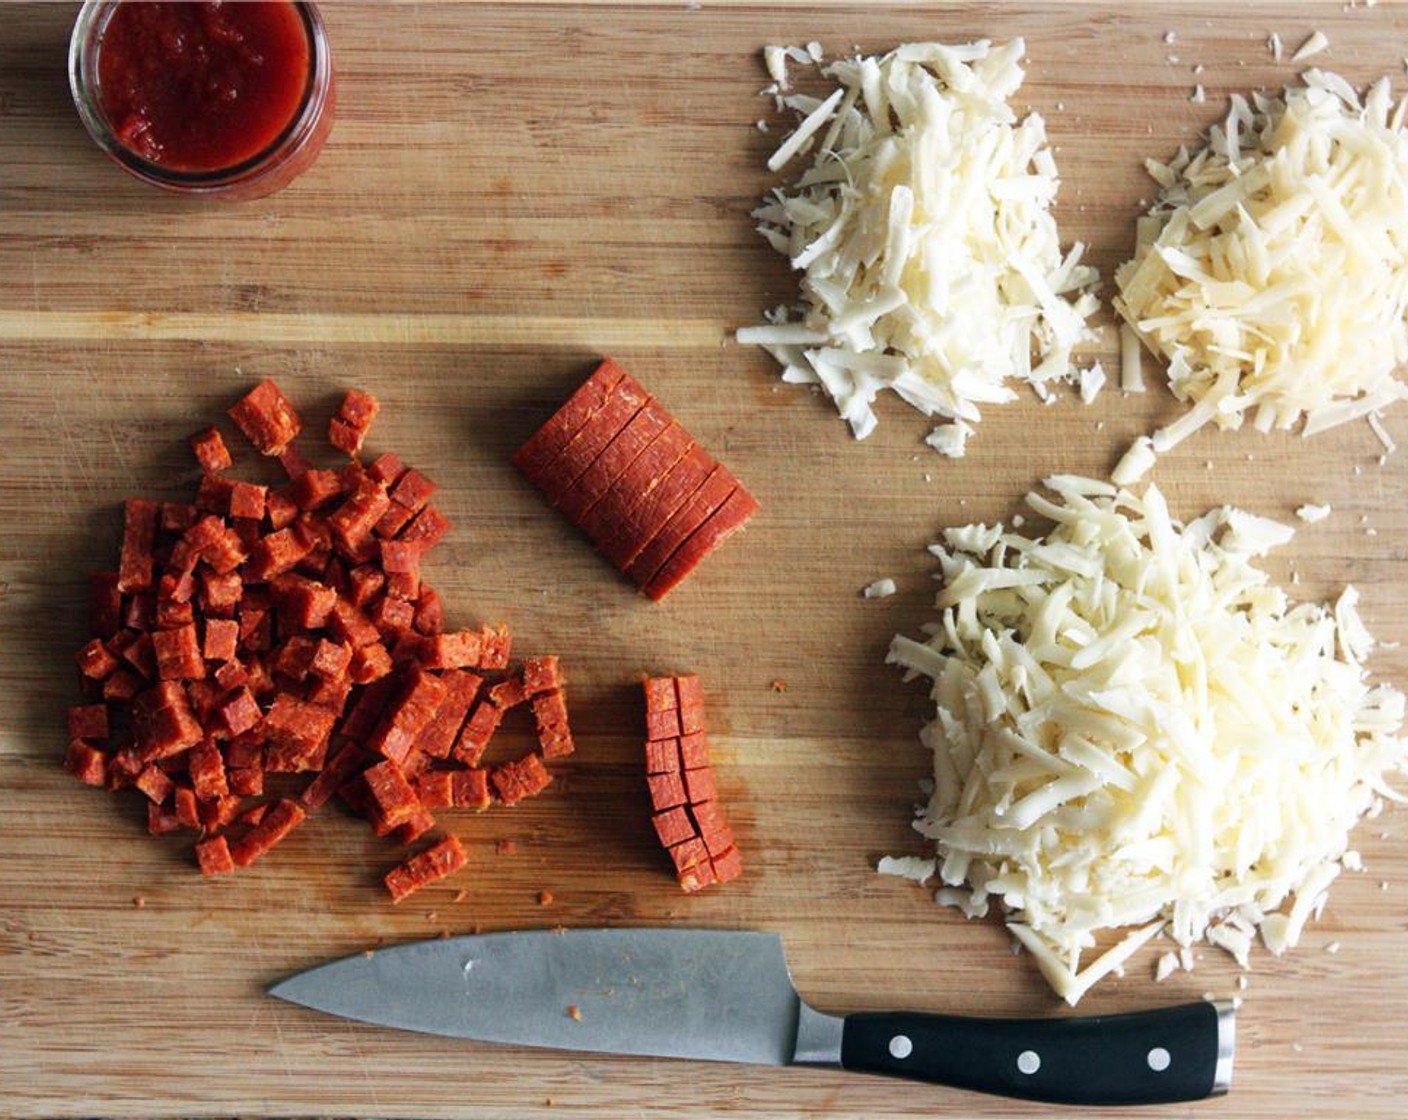 step 1 Chop the whole stick of Pepperoni Sausage (6 oz) into small cubes. Grate the Mozzarella Cheese (1 cup), Asiago Cheese (4 Tbsp), and Parmesan Cheese (1/3 cup).